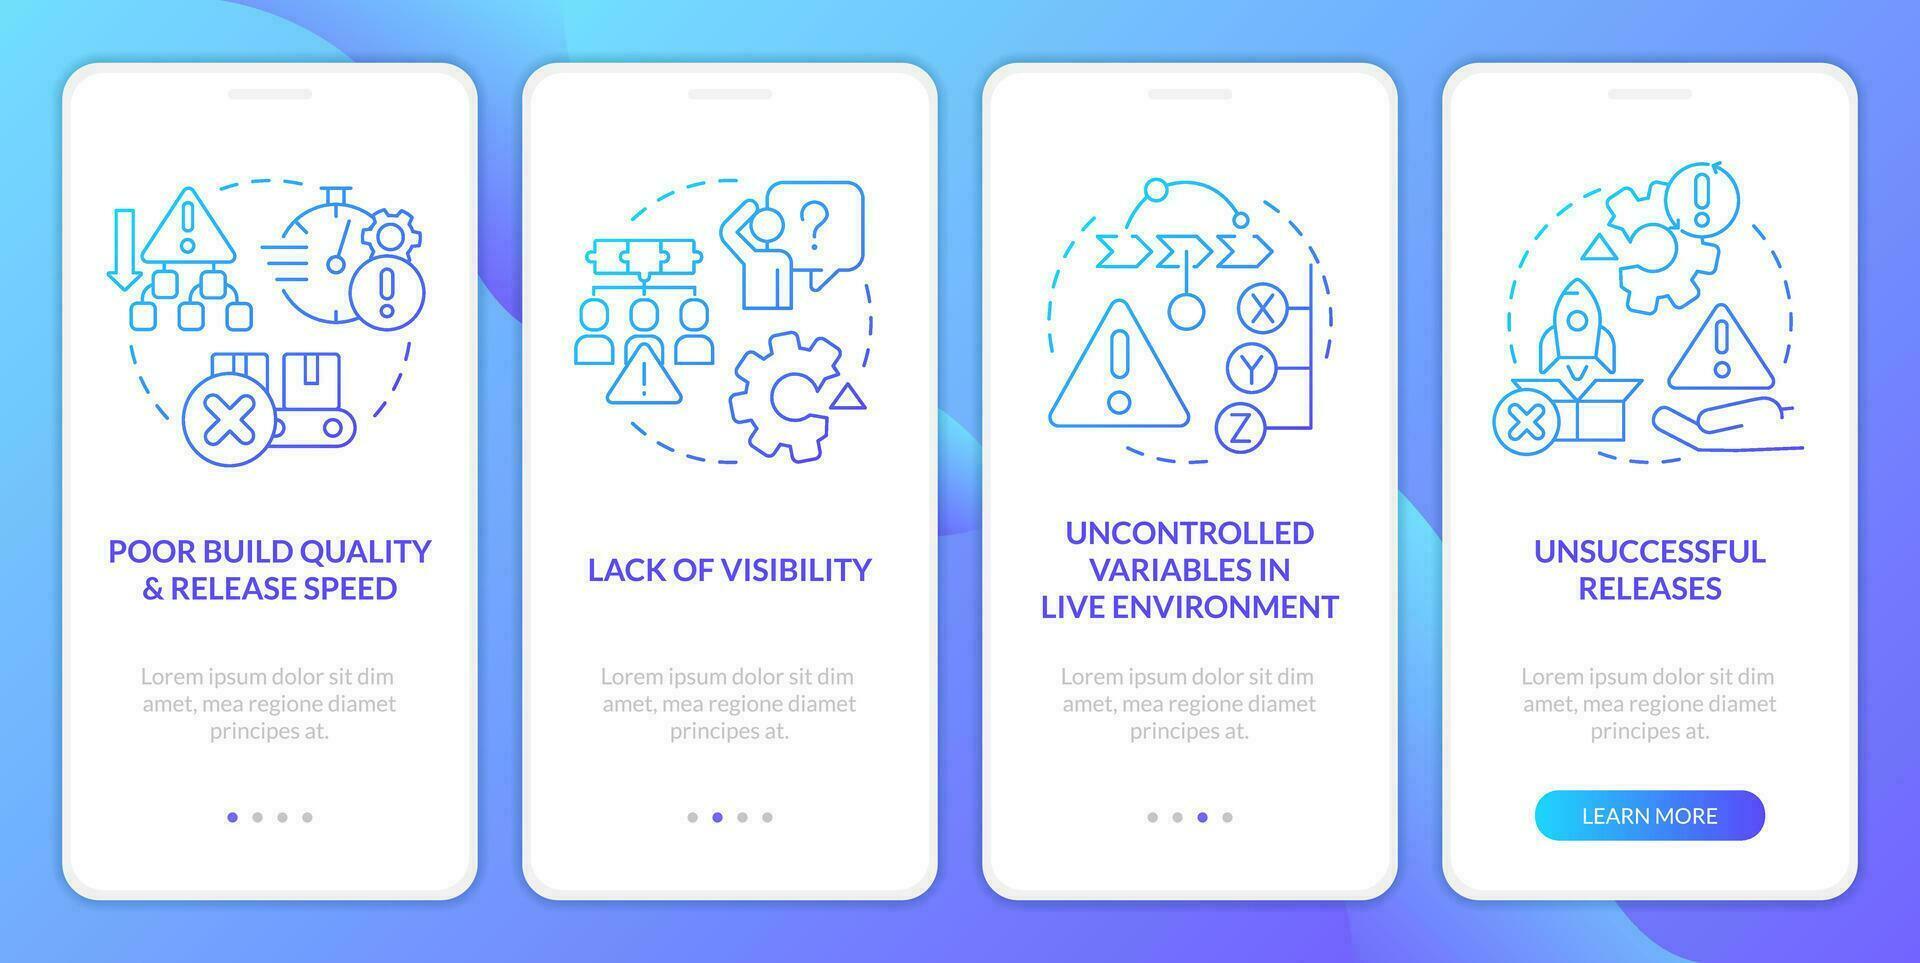 Release management pain points blue gradient onboarding mobile app screen. Walkthrough 4 steps graphic instructions with linear concepts. UI, UX, GUI template vector